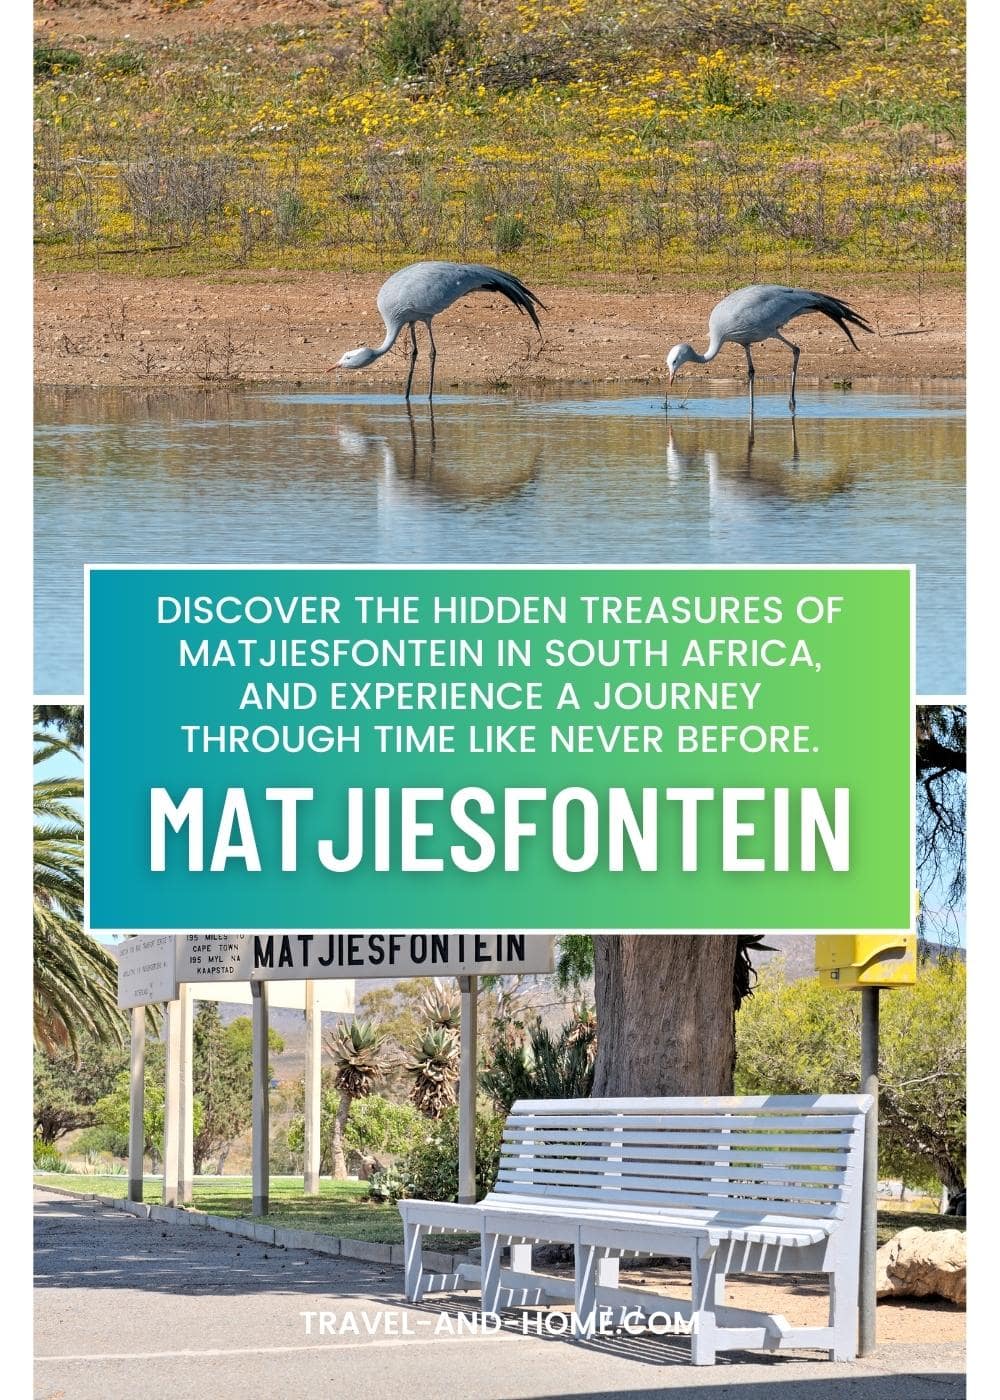 things to do in Matjiesfontein, travel and home, travel guide min